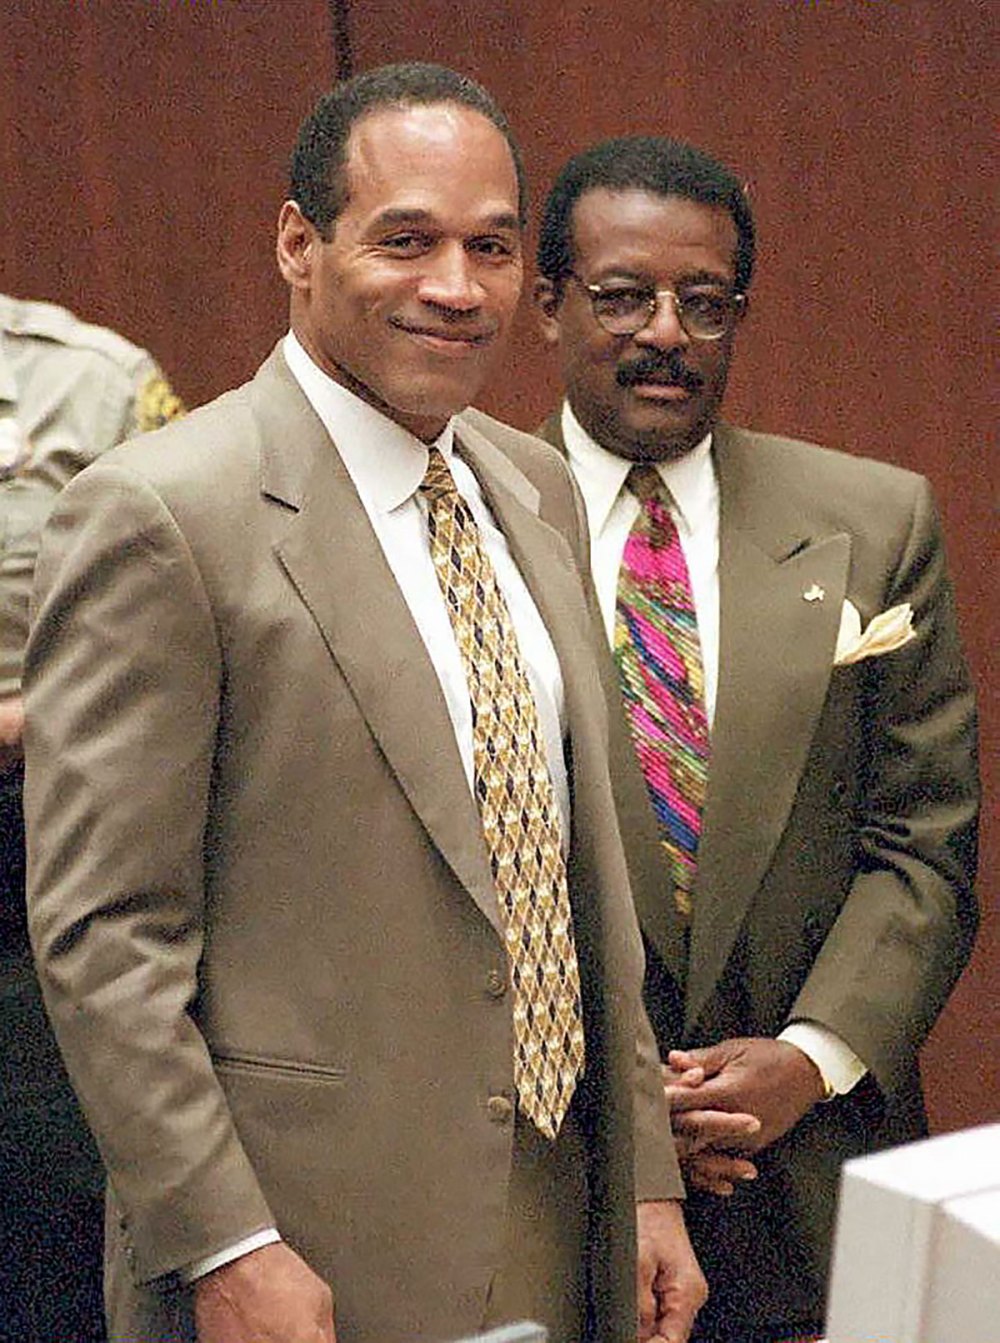 Acquittal Key Moments From OJ Simpson Murder Trial